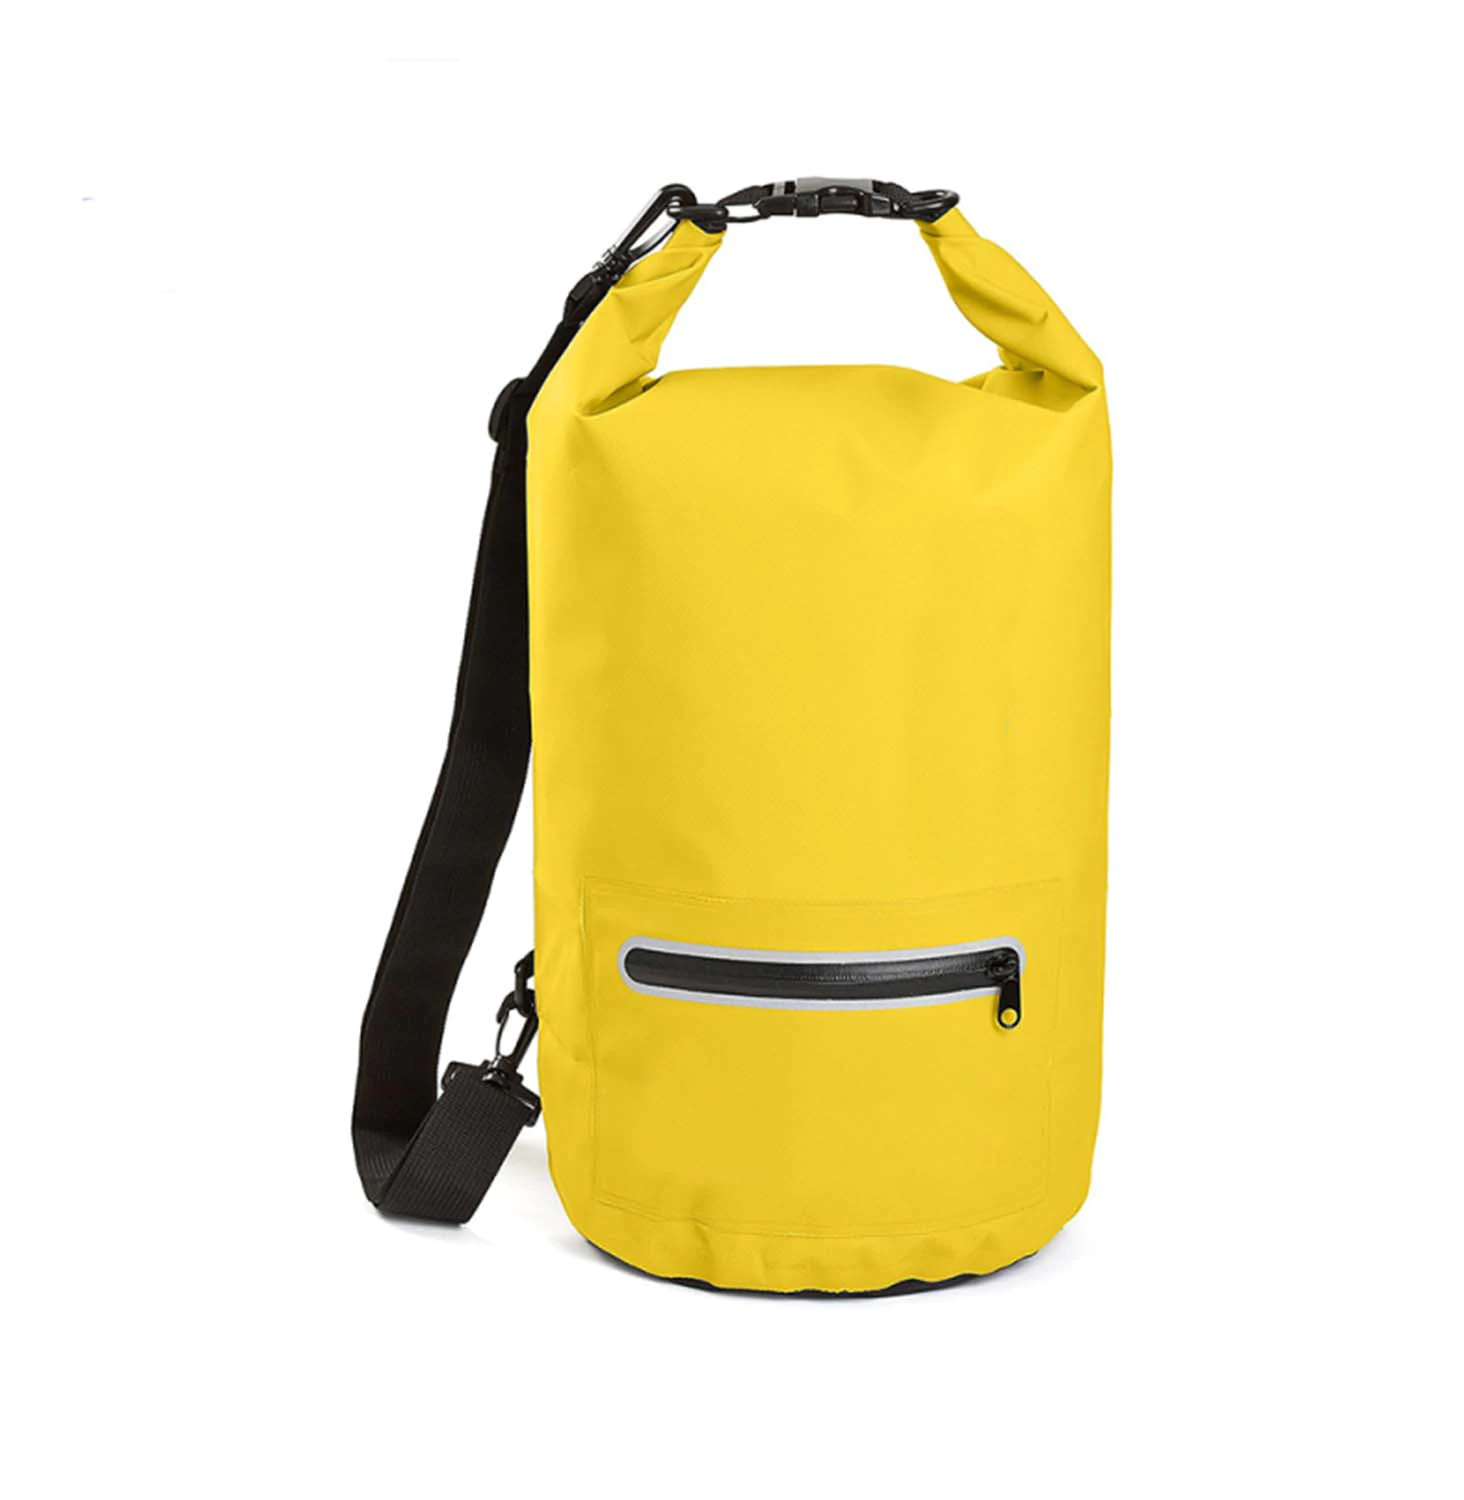 floating go outdoors dry bag with innovative transparent window design for rafting